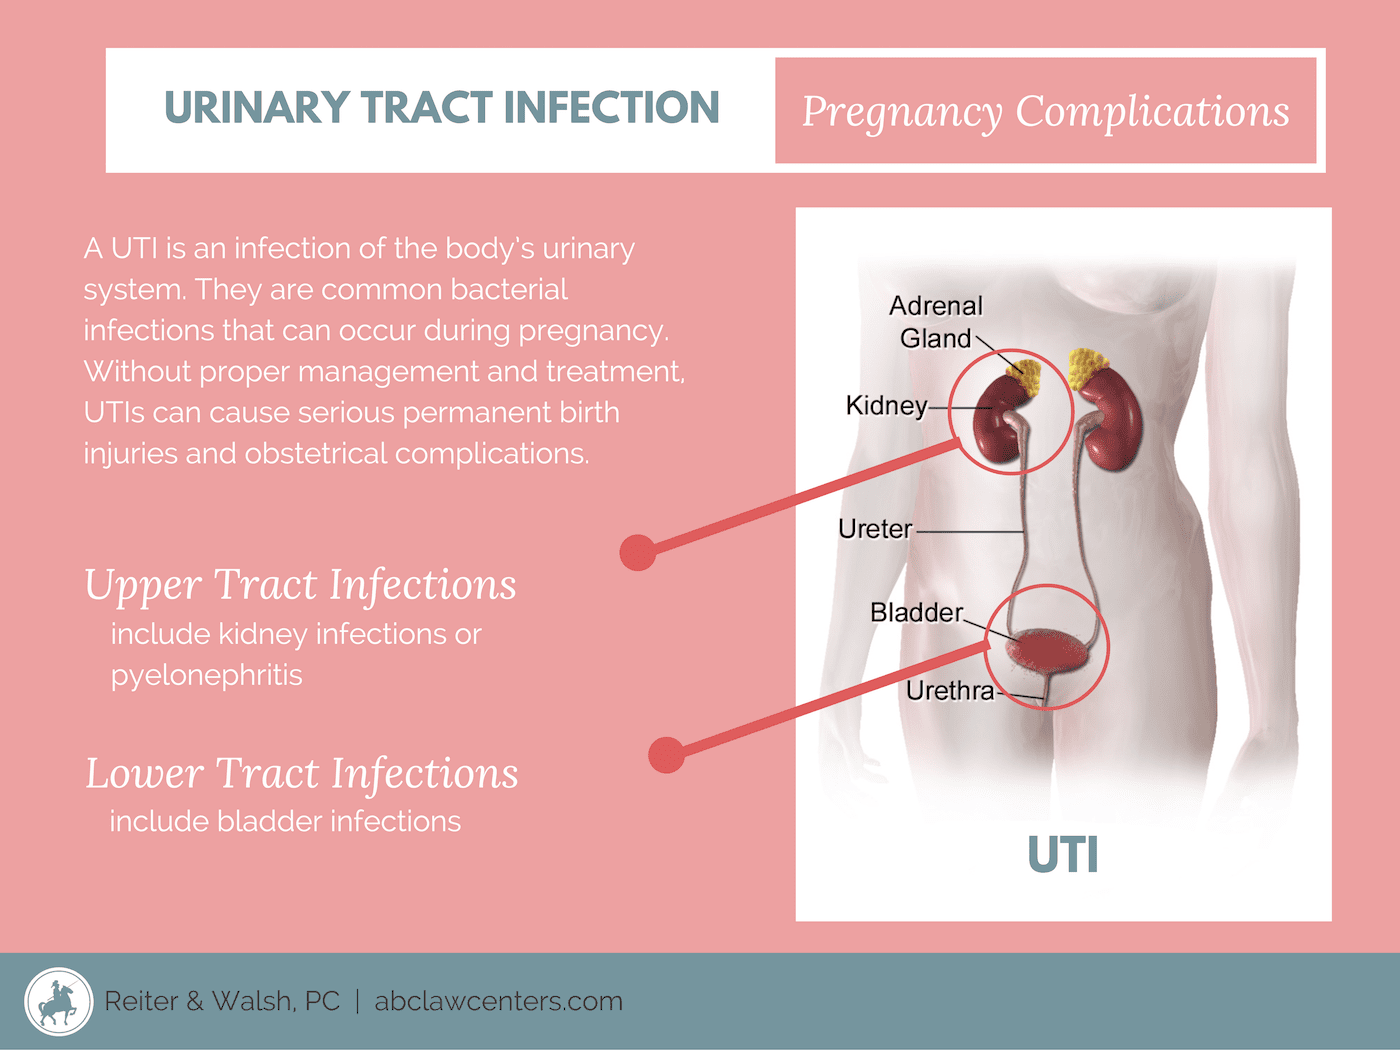 Prevention of Urinary Tract Infections (UTIs) In Pregnancy